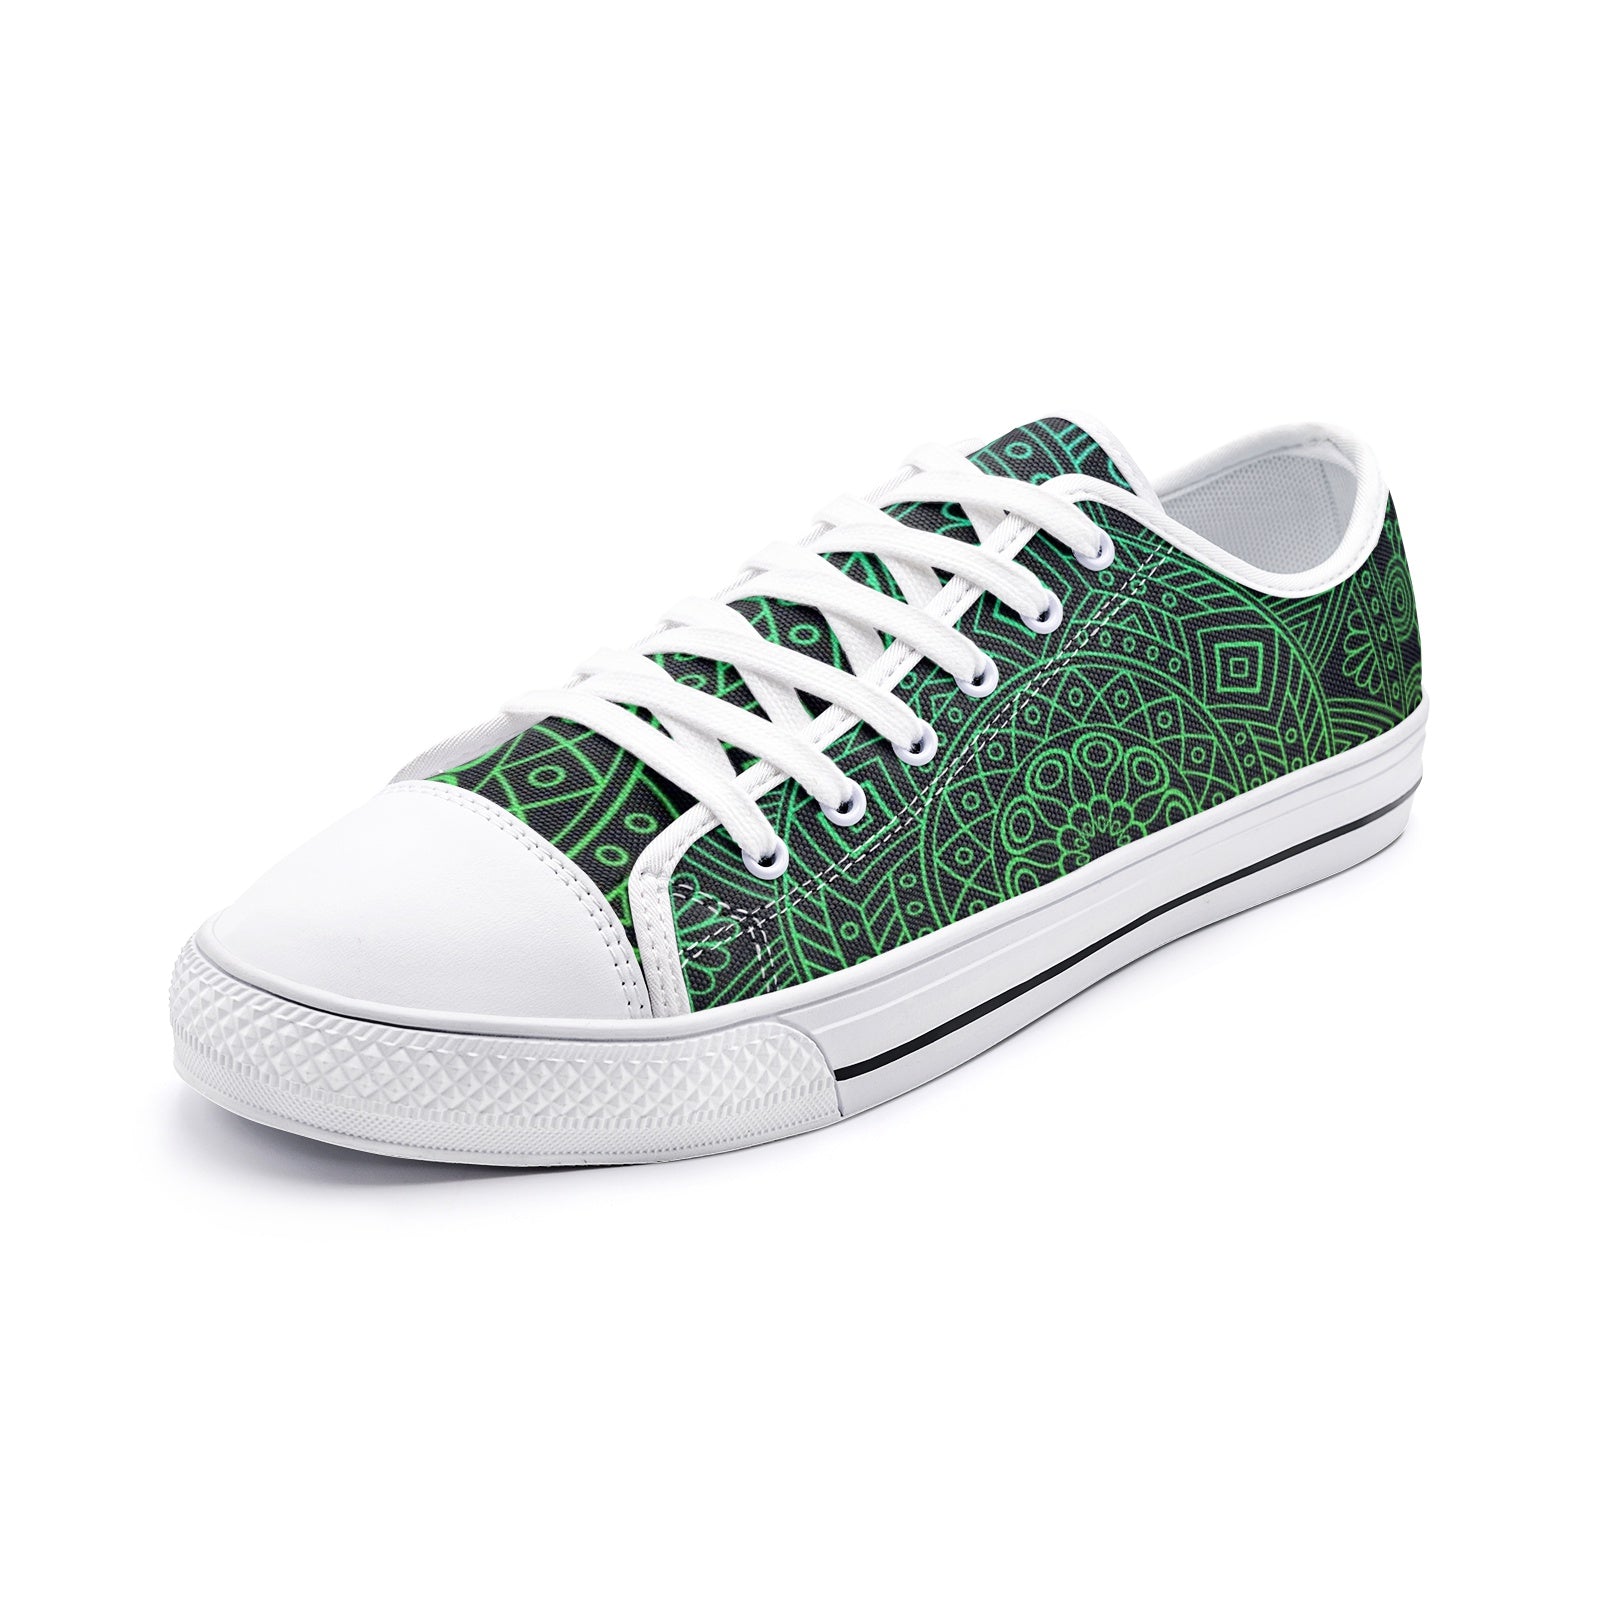 Green Unisex Low Top Canvas Shoes